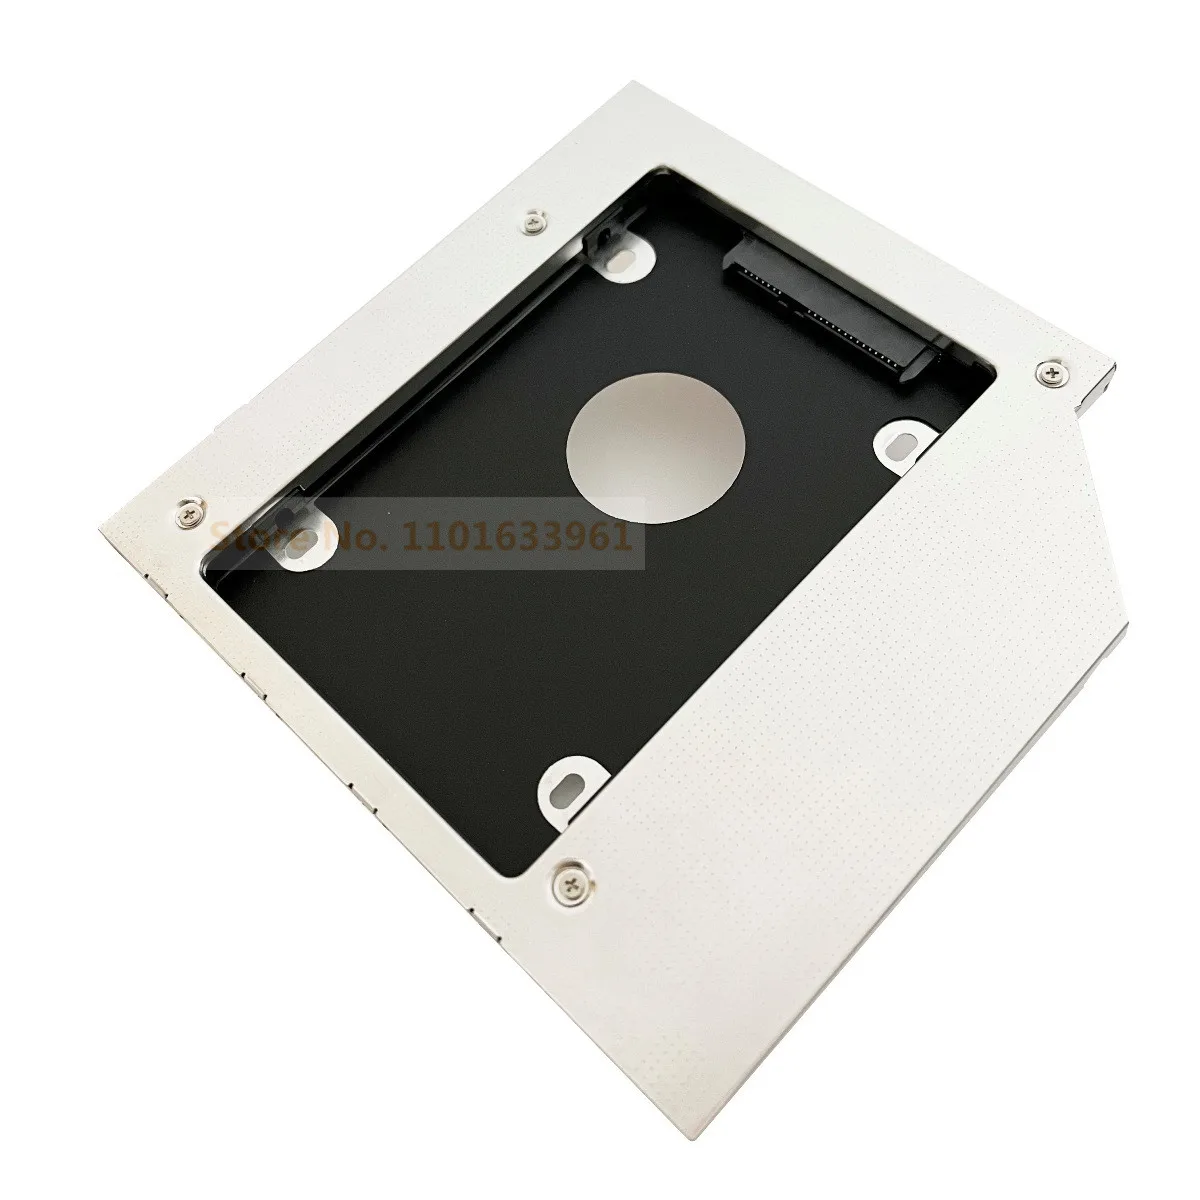 

Universal 9.0mm SATA 2nd Hard Drive HDD SSD Optical Caddy Frame Adapter for Toshiba Satellite A50-C A50-C-16D P50T P55 P55t